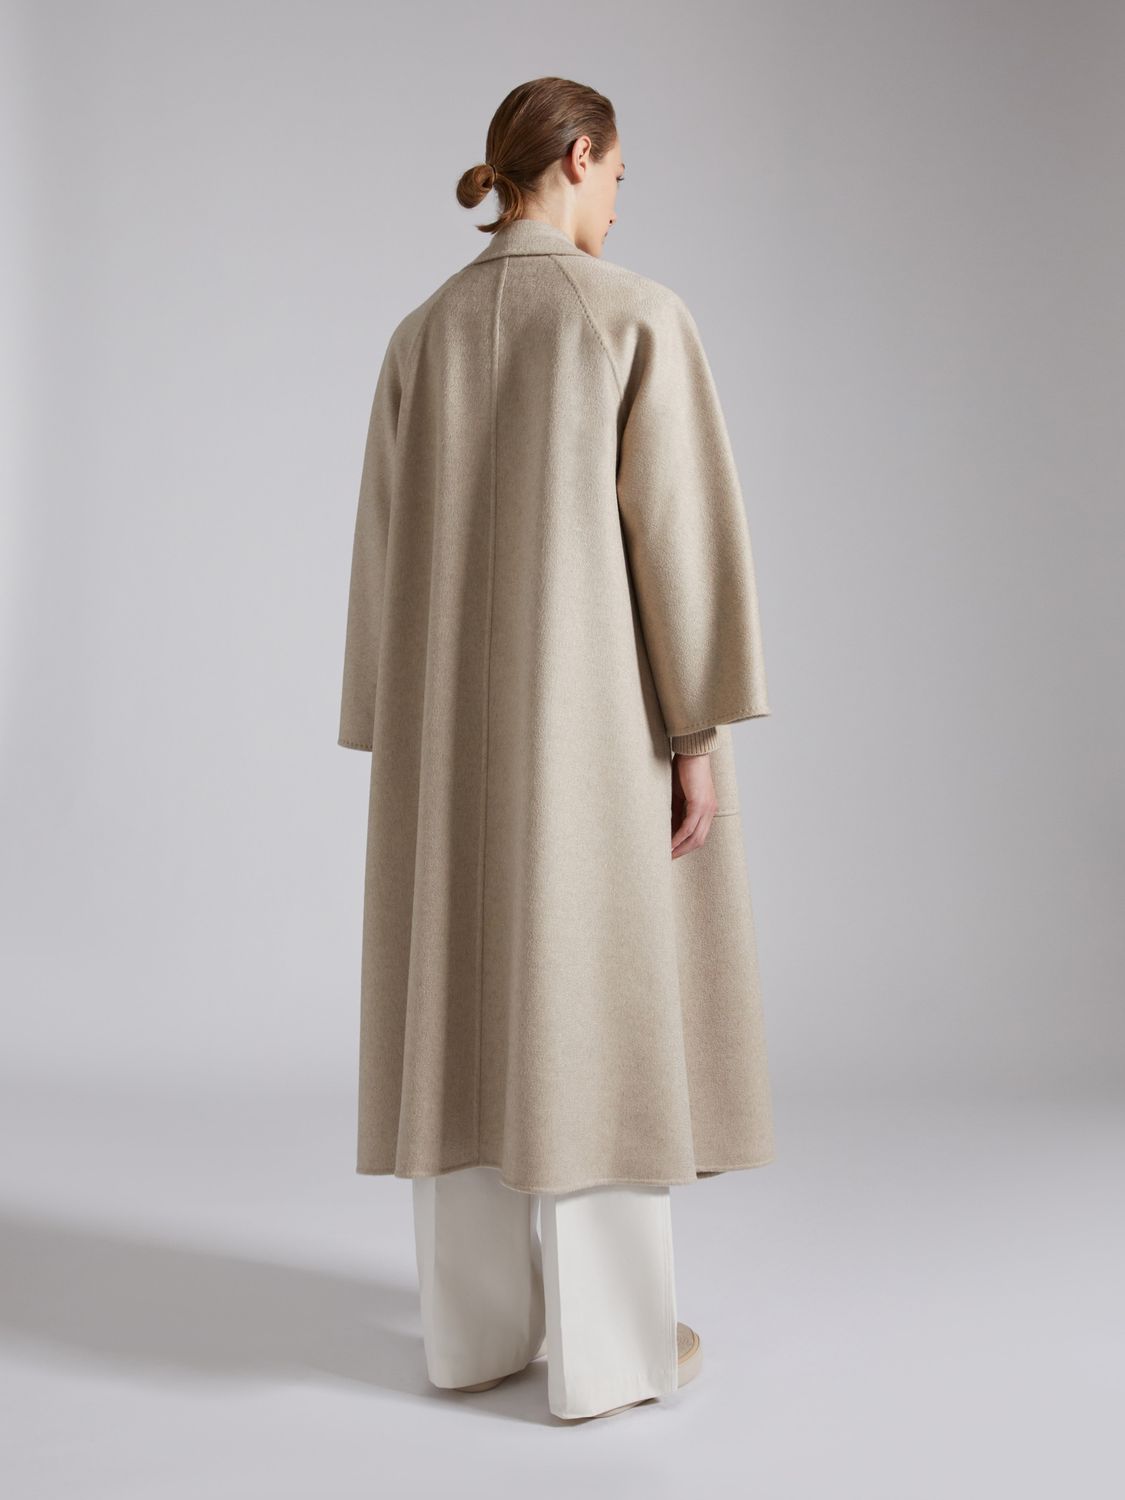 MAX MARA Luxurious Cashmere Jacket in Beige for the Modern Woman